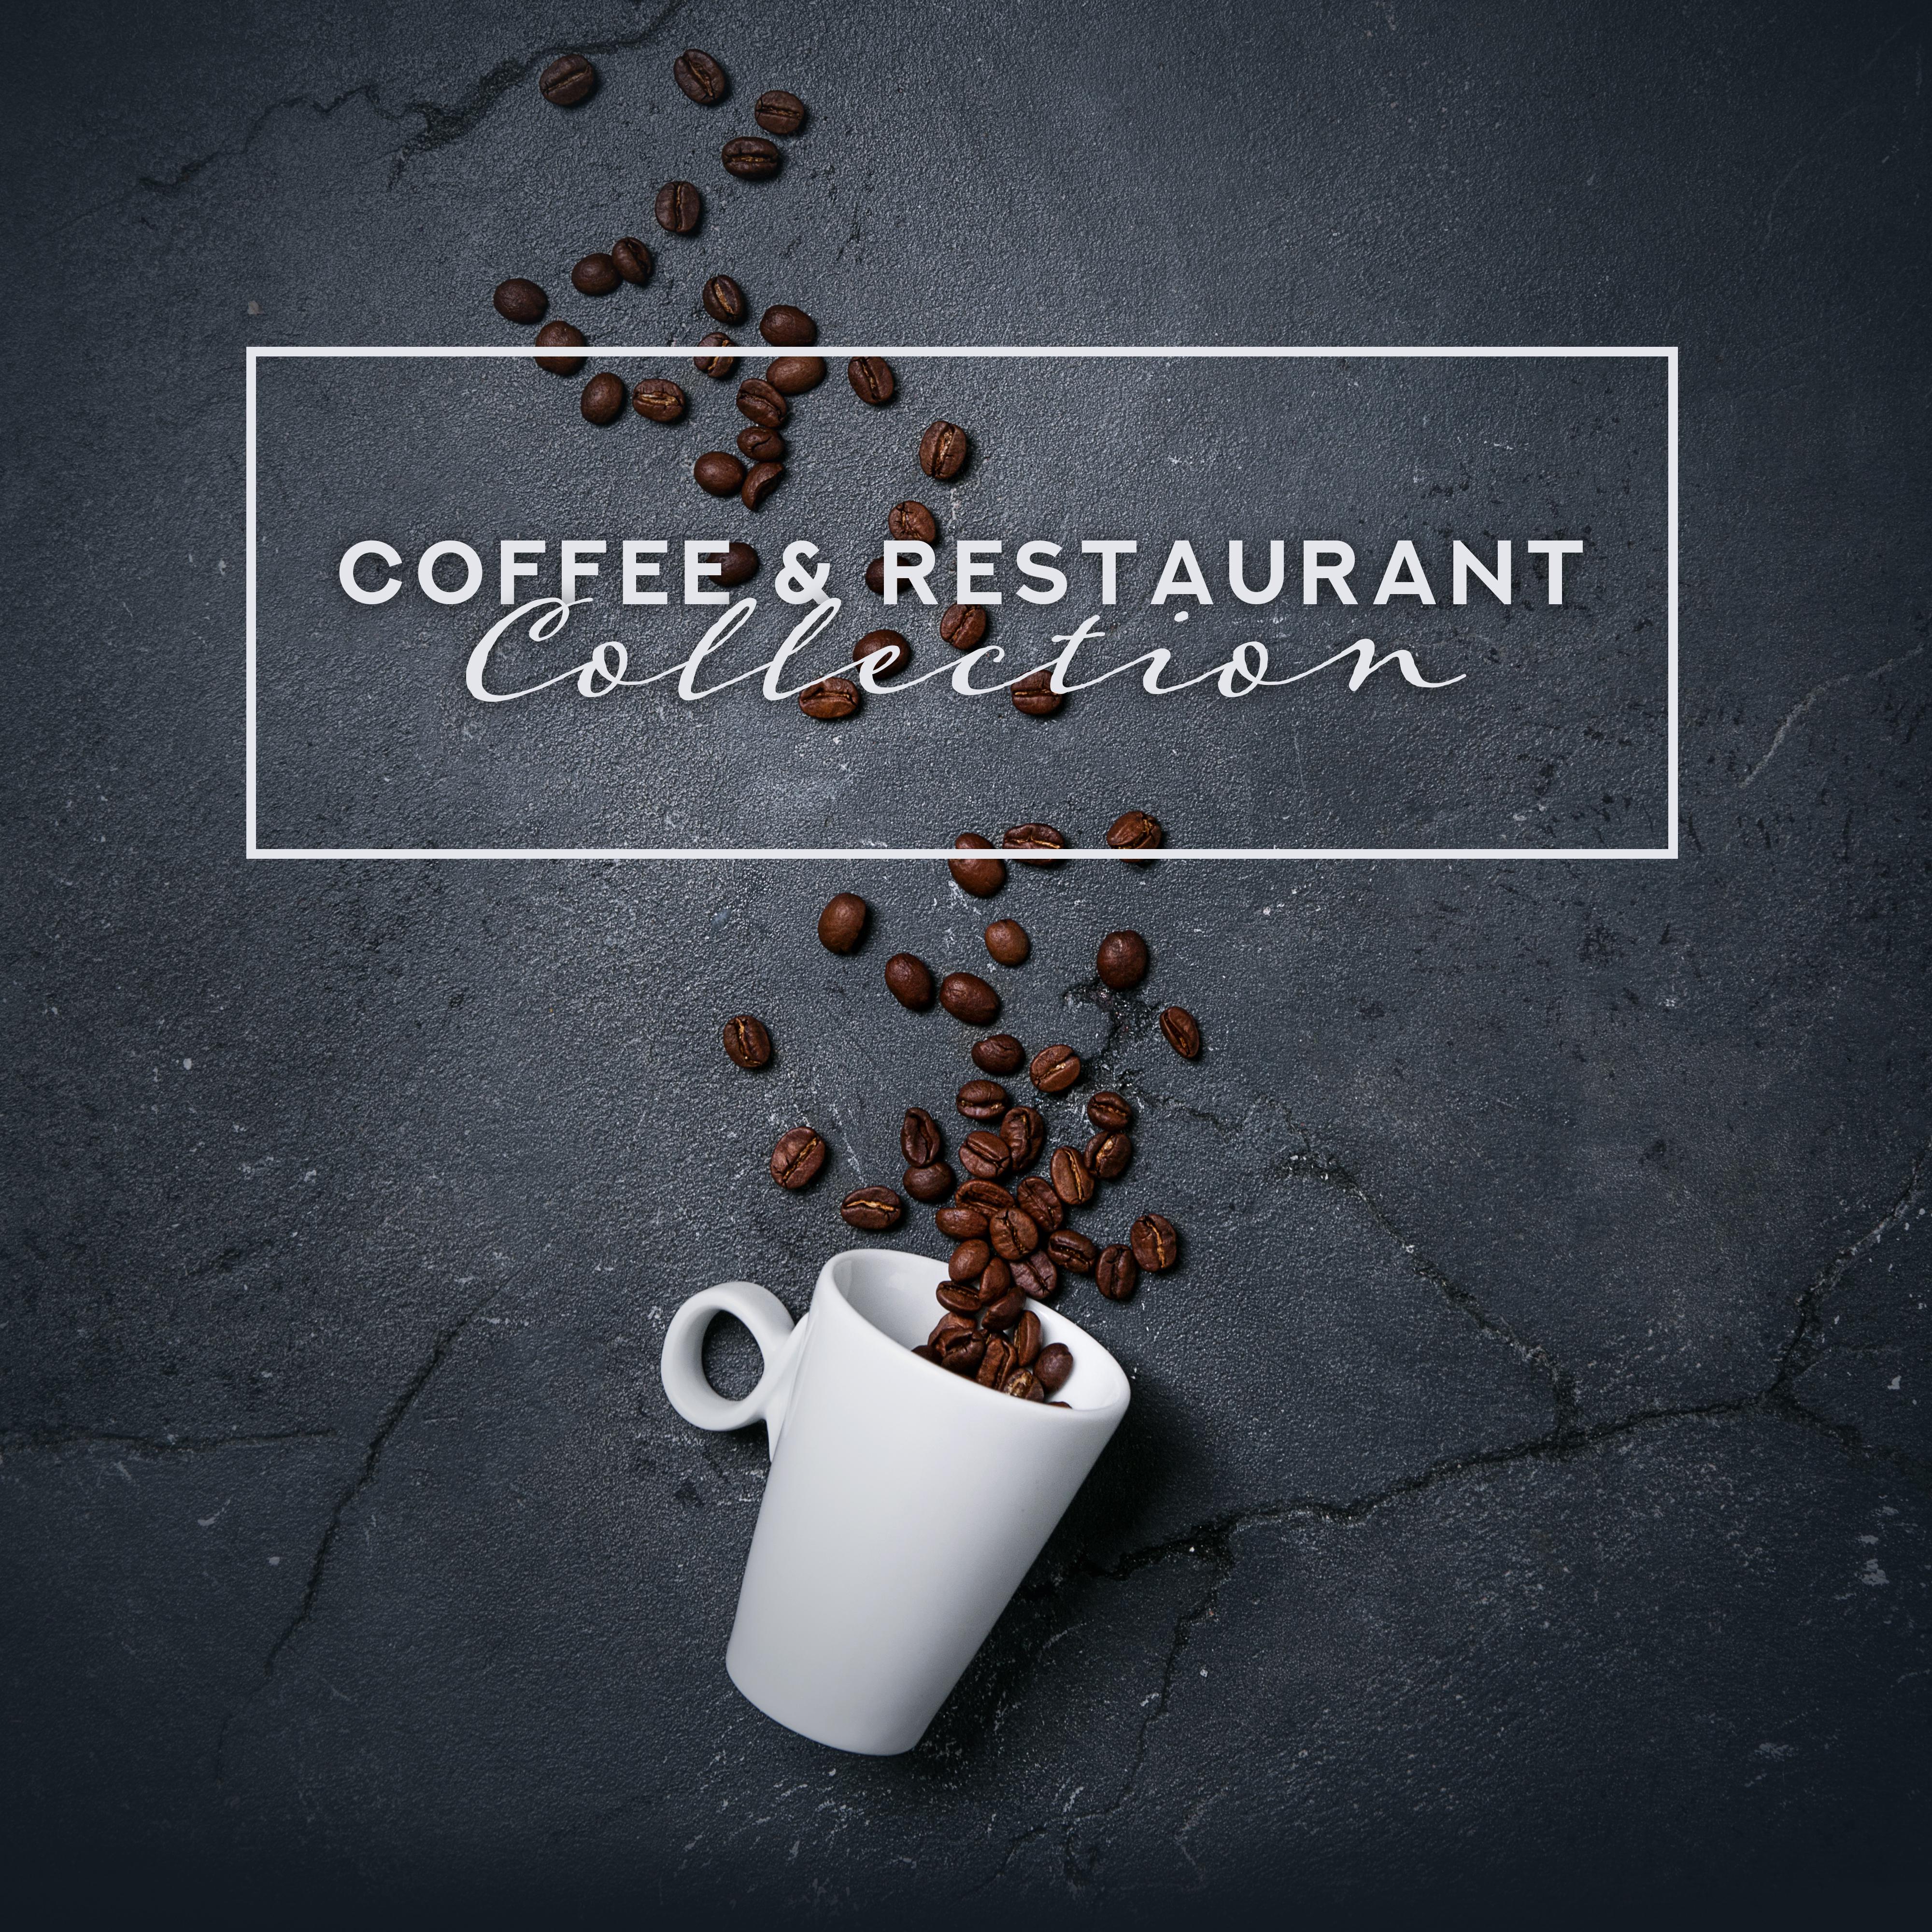 Coffee  Restaurant Collection  Soft Jazz for Relaxation, Best of Bar Jazz, Cocktail Jazz, Parisian Cafe, Jazz Lounge